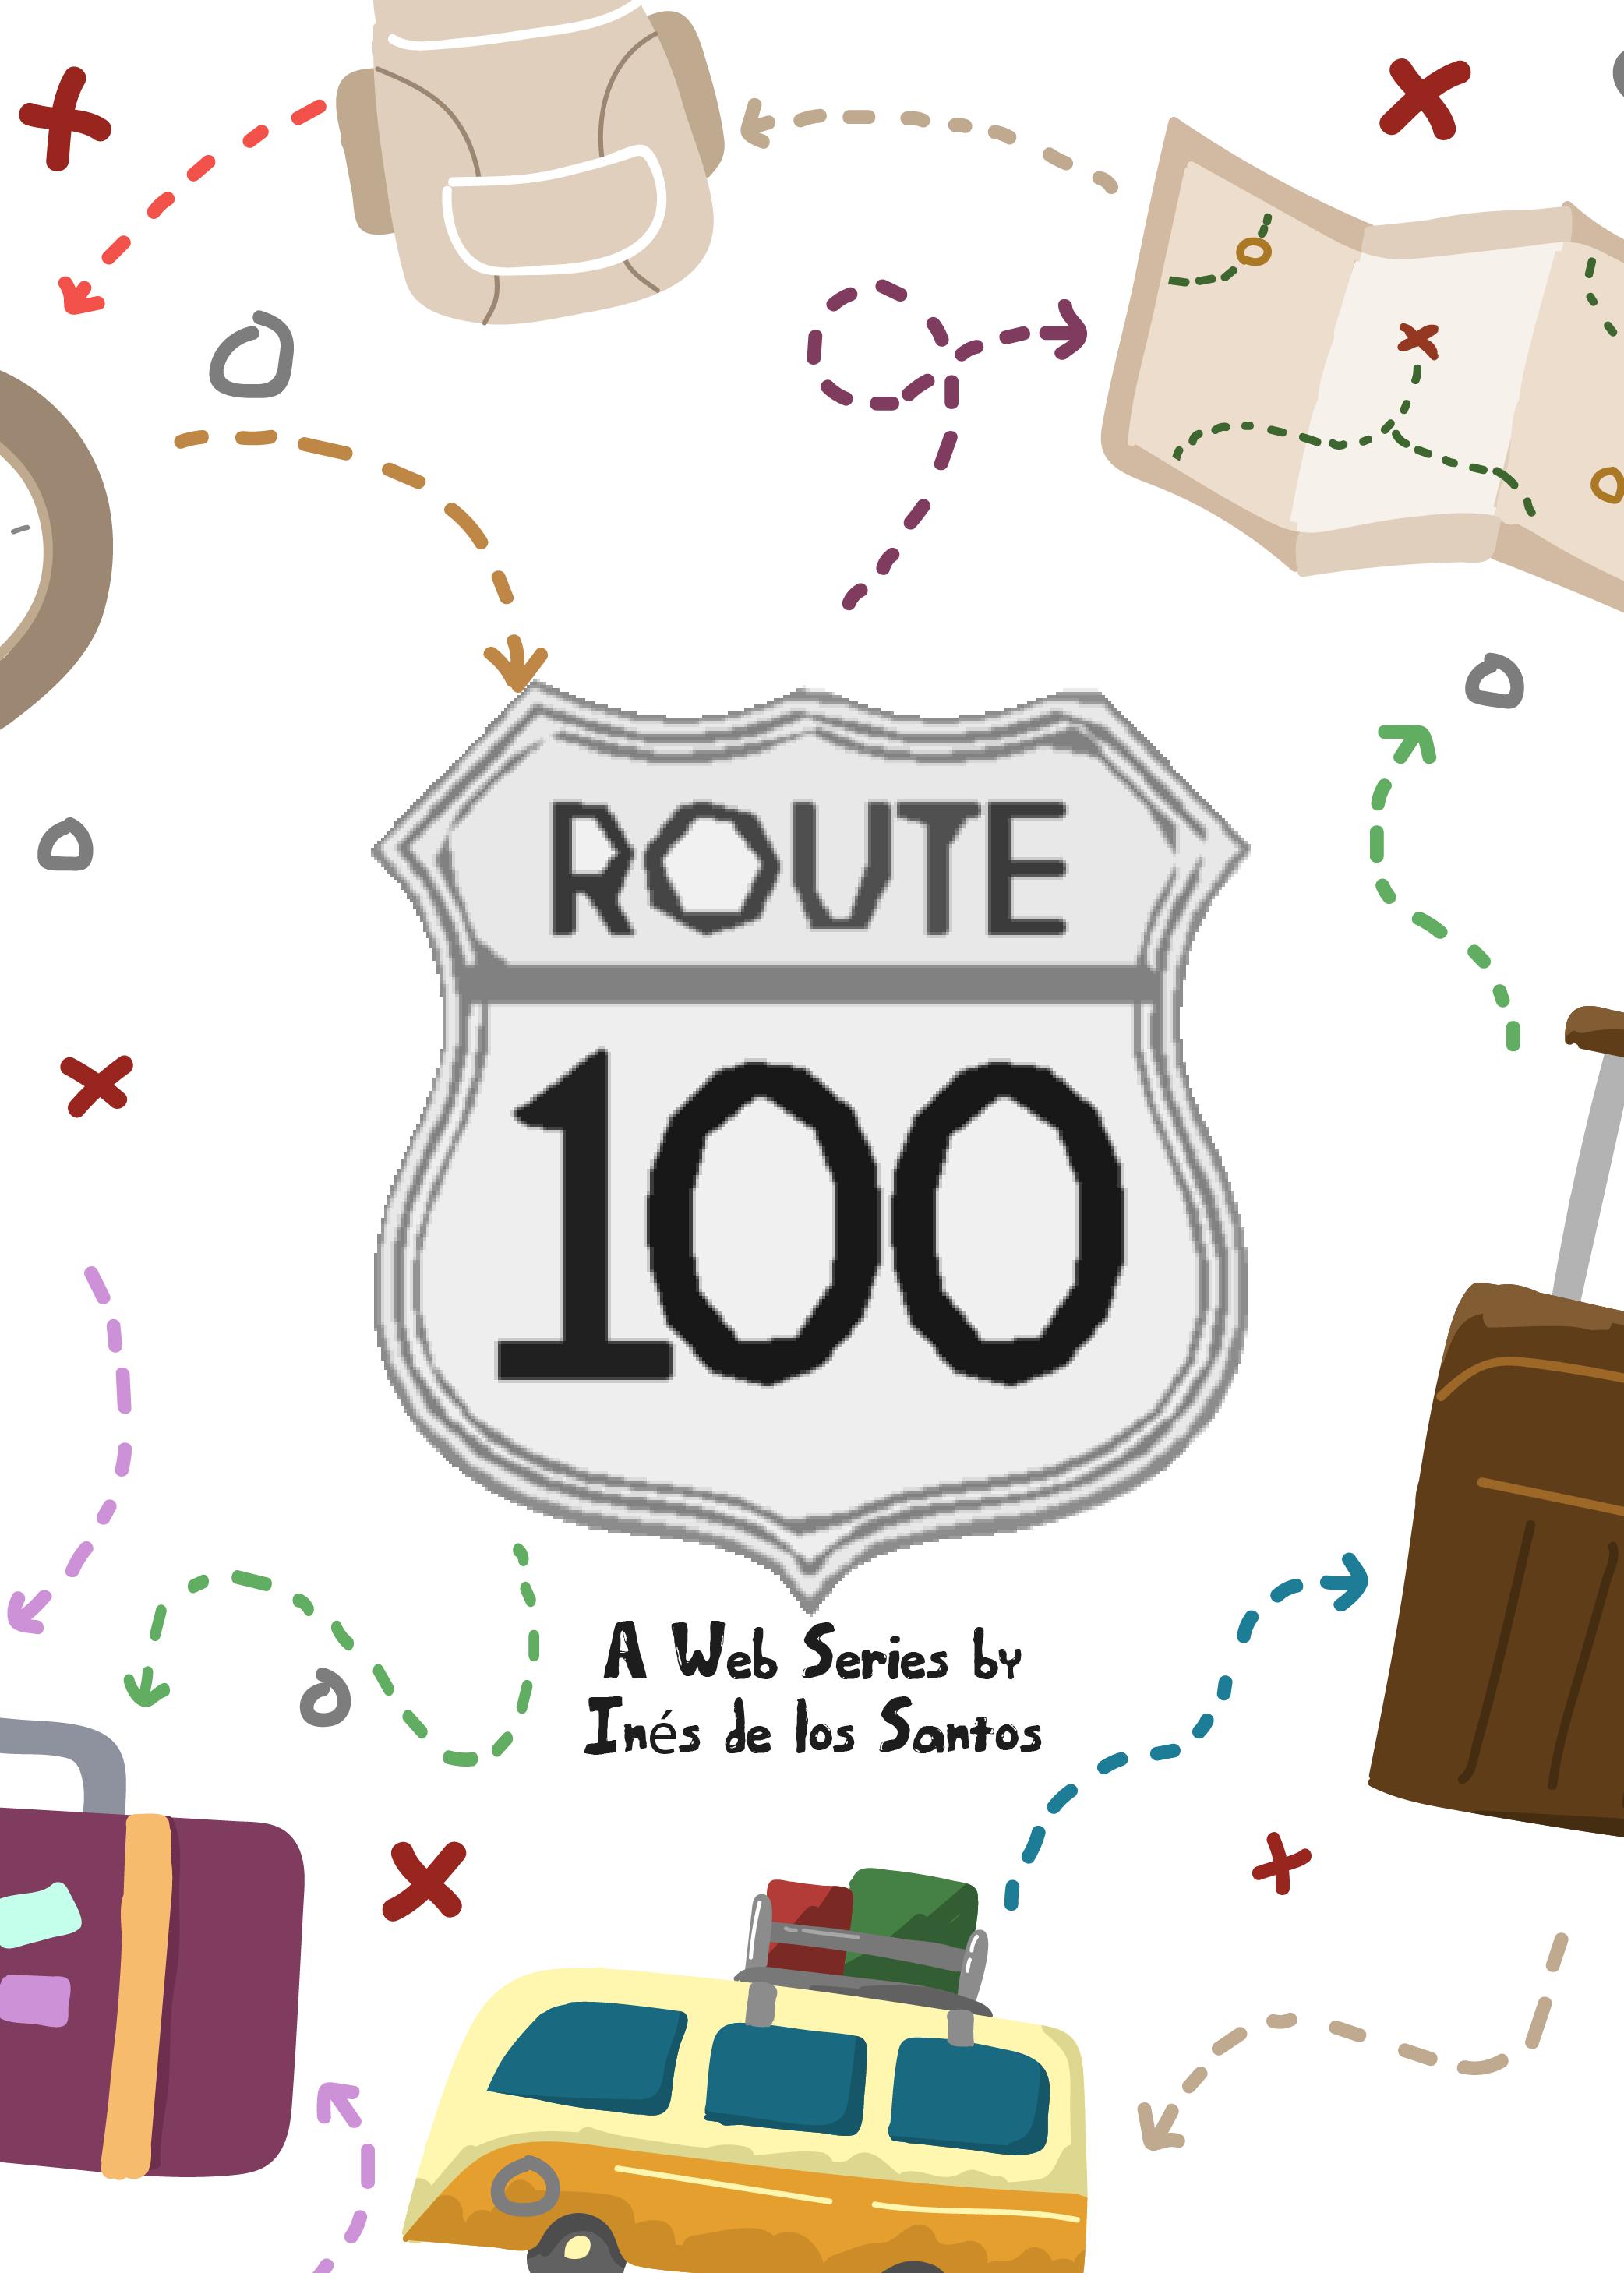 Route 100